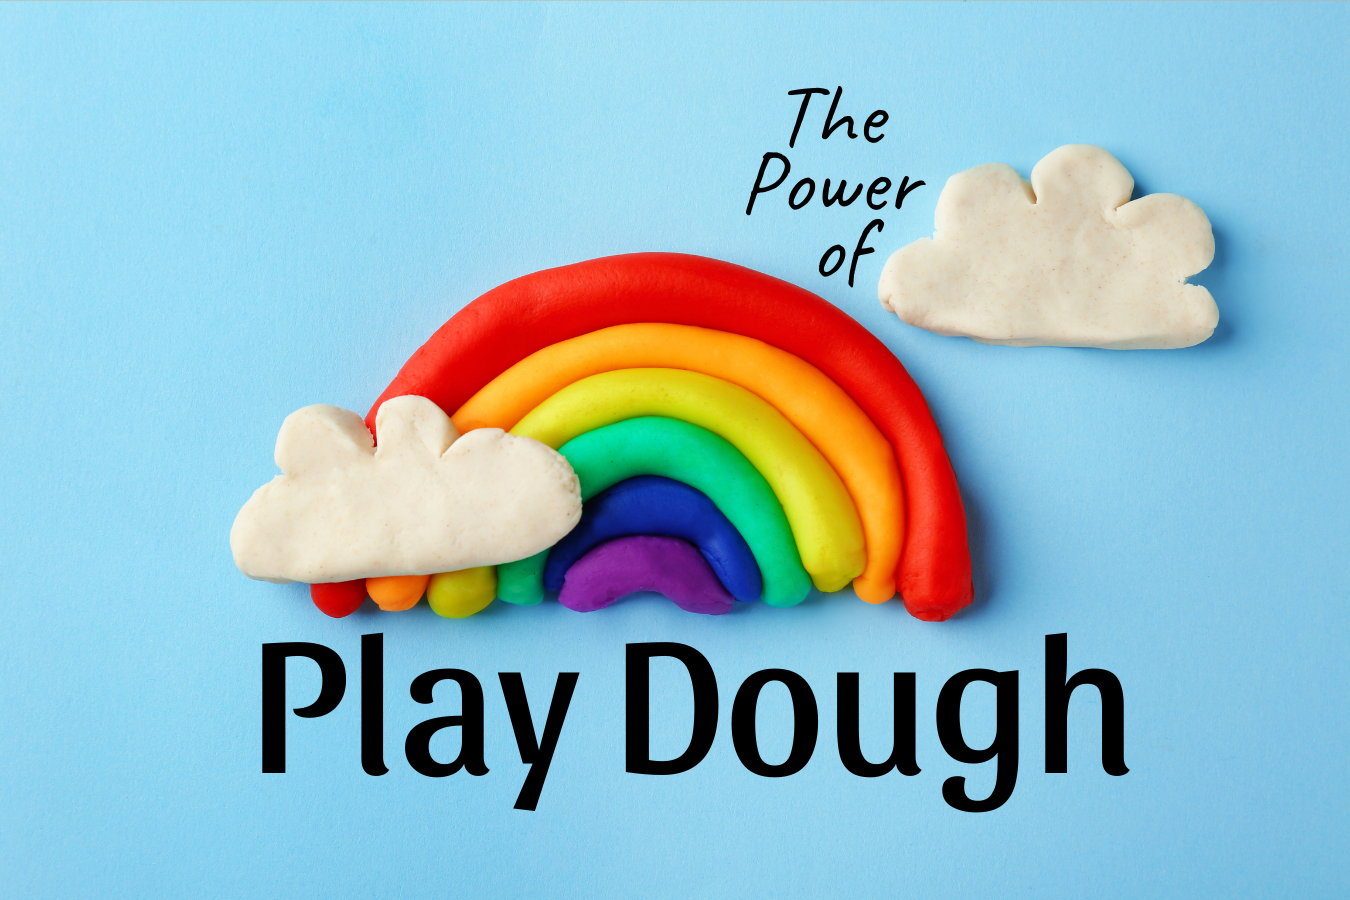 The power of playdough blog feature image features a playdough rainbow and clouds on a light blue background